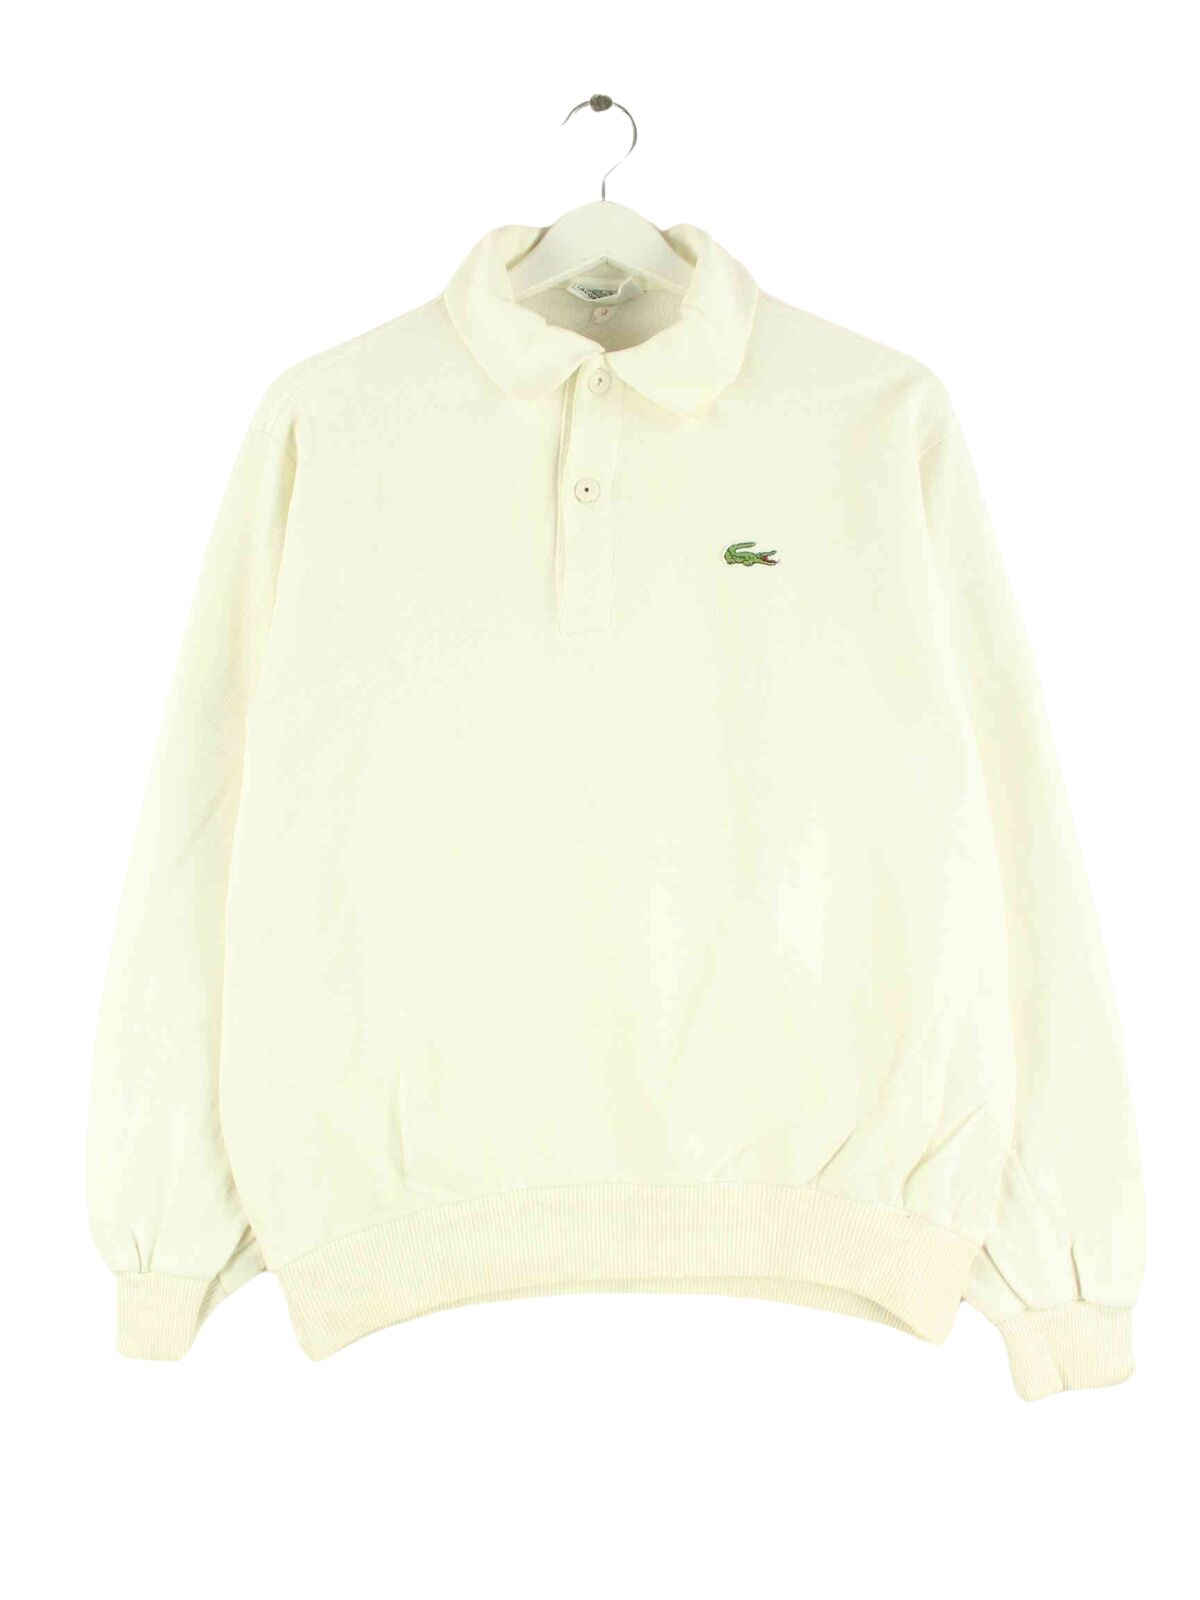 Lacoste 90s Vintage Polo Sweater Beige M (front image)